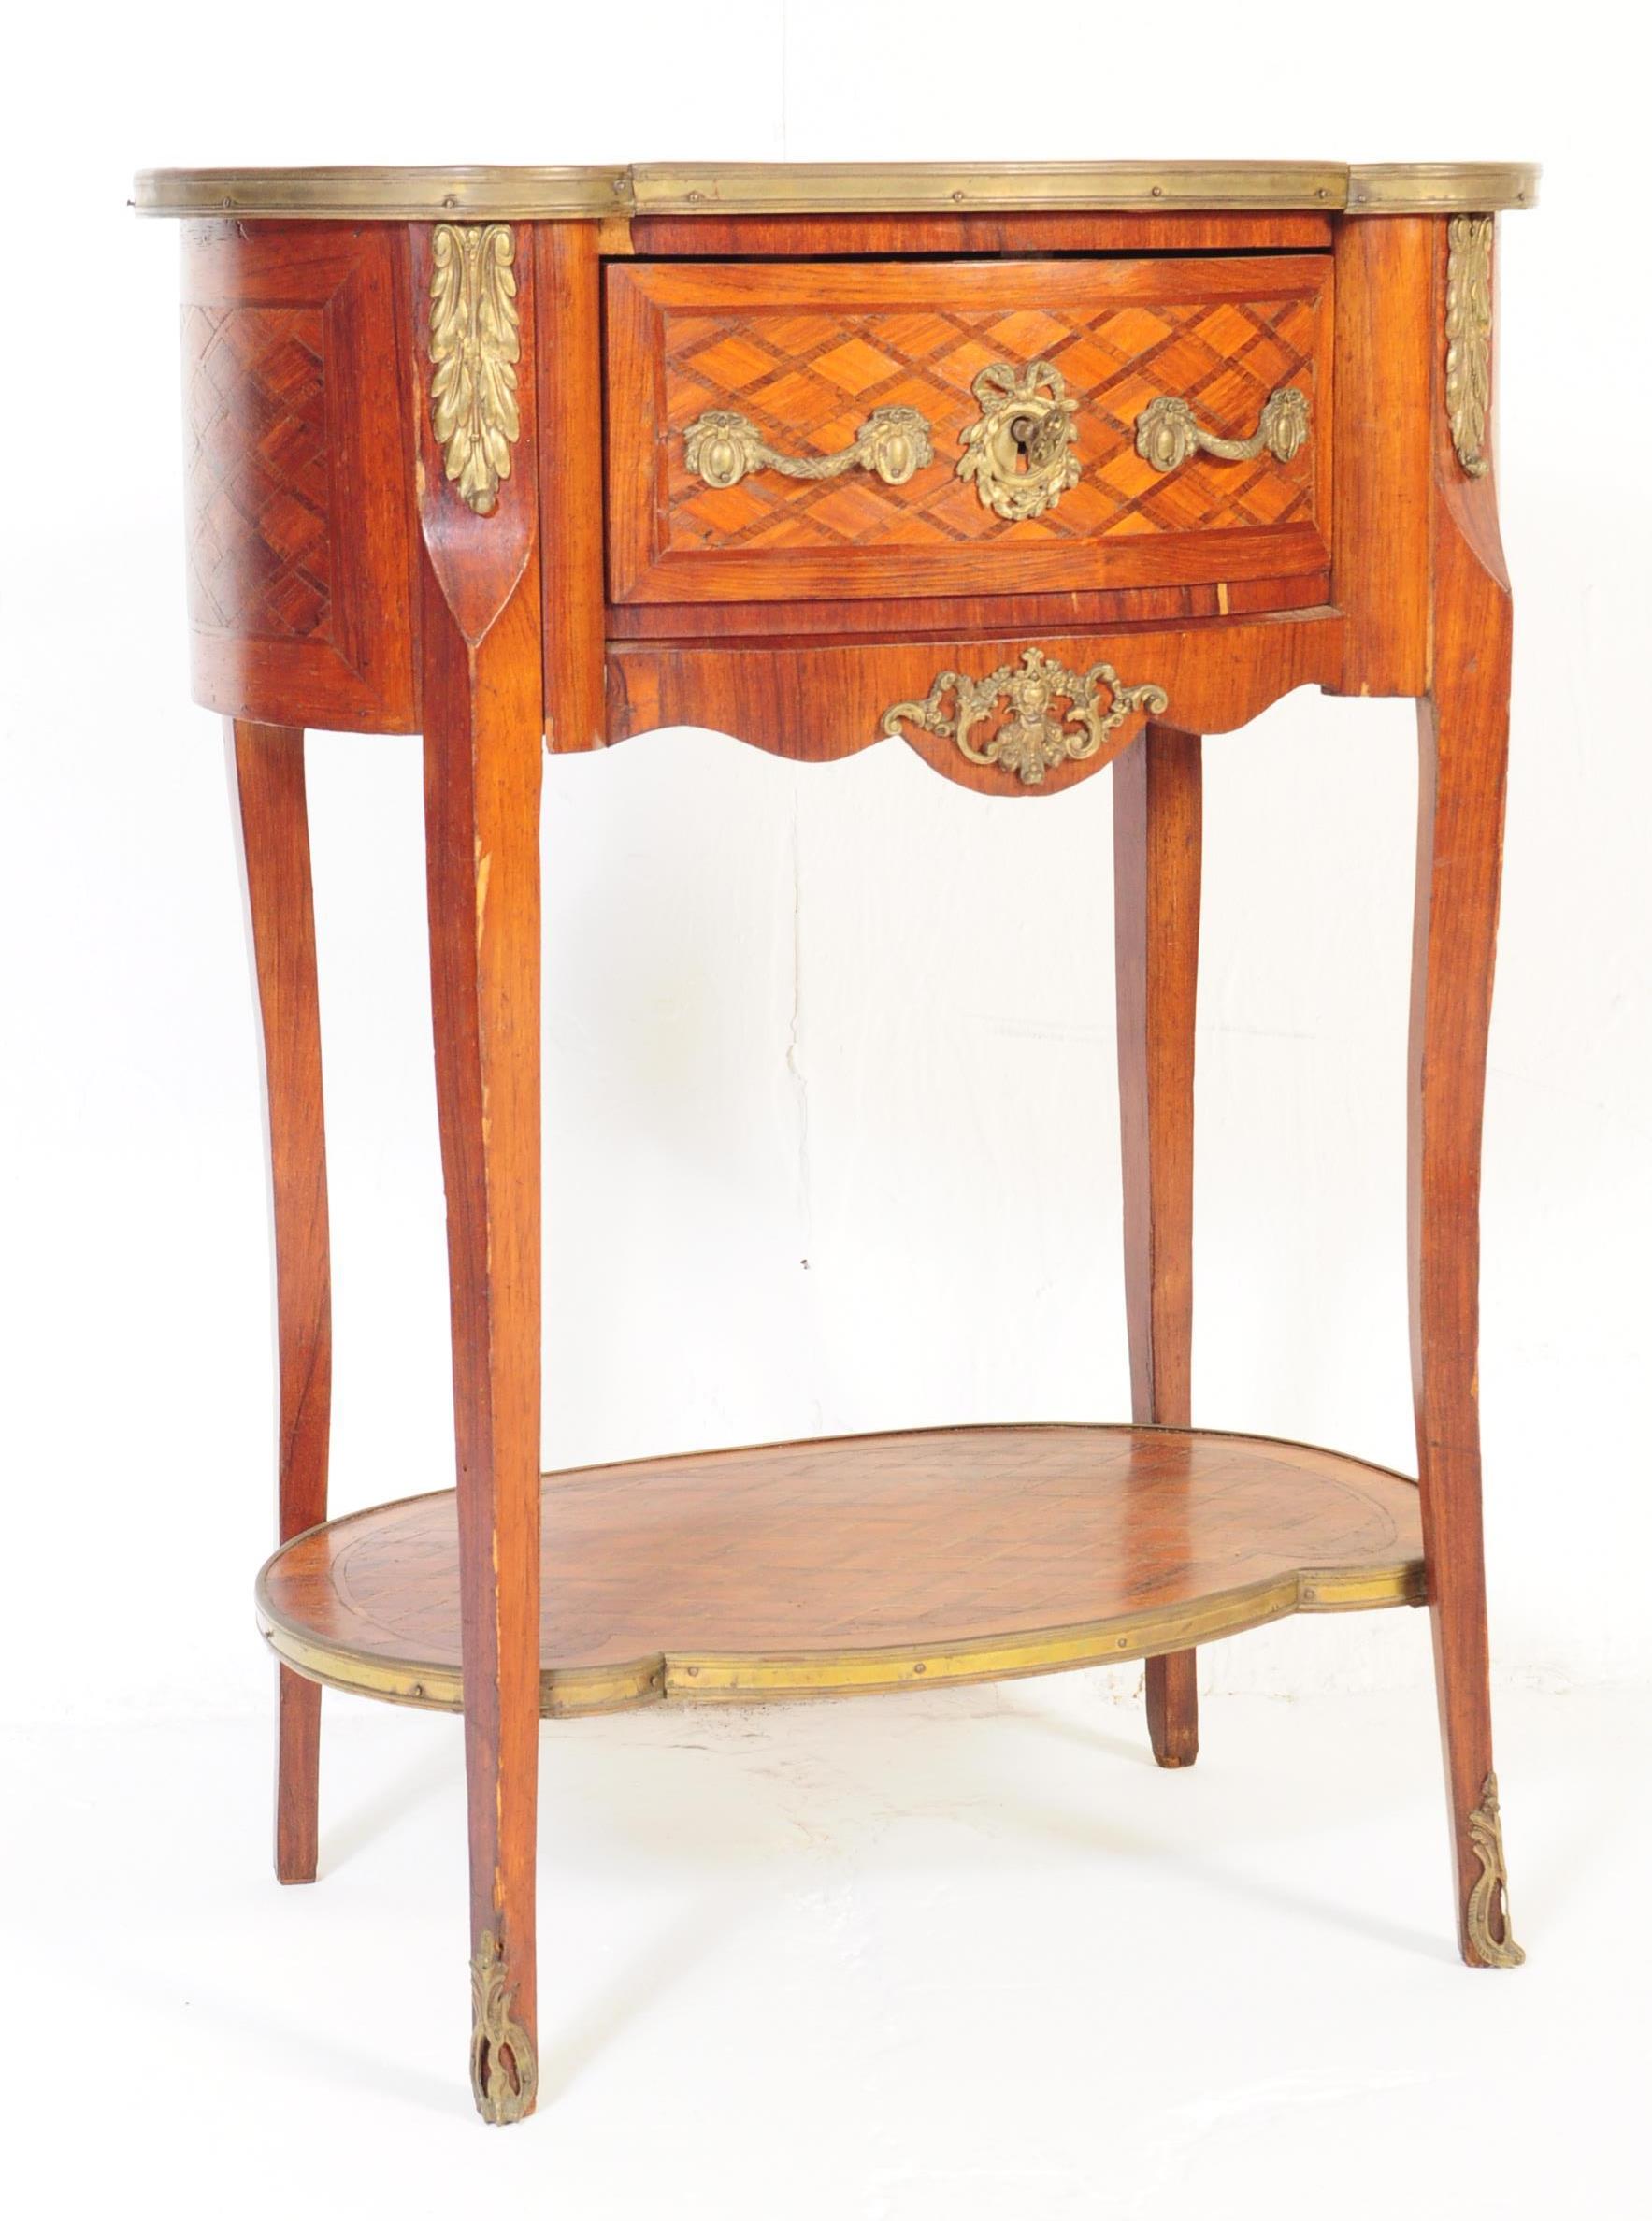 19TH CENTURY LOUIS XVI STYLE MARQUETRY LAMP TABLE